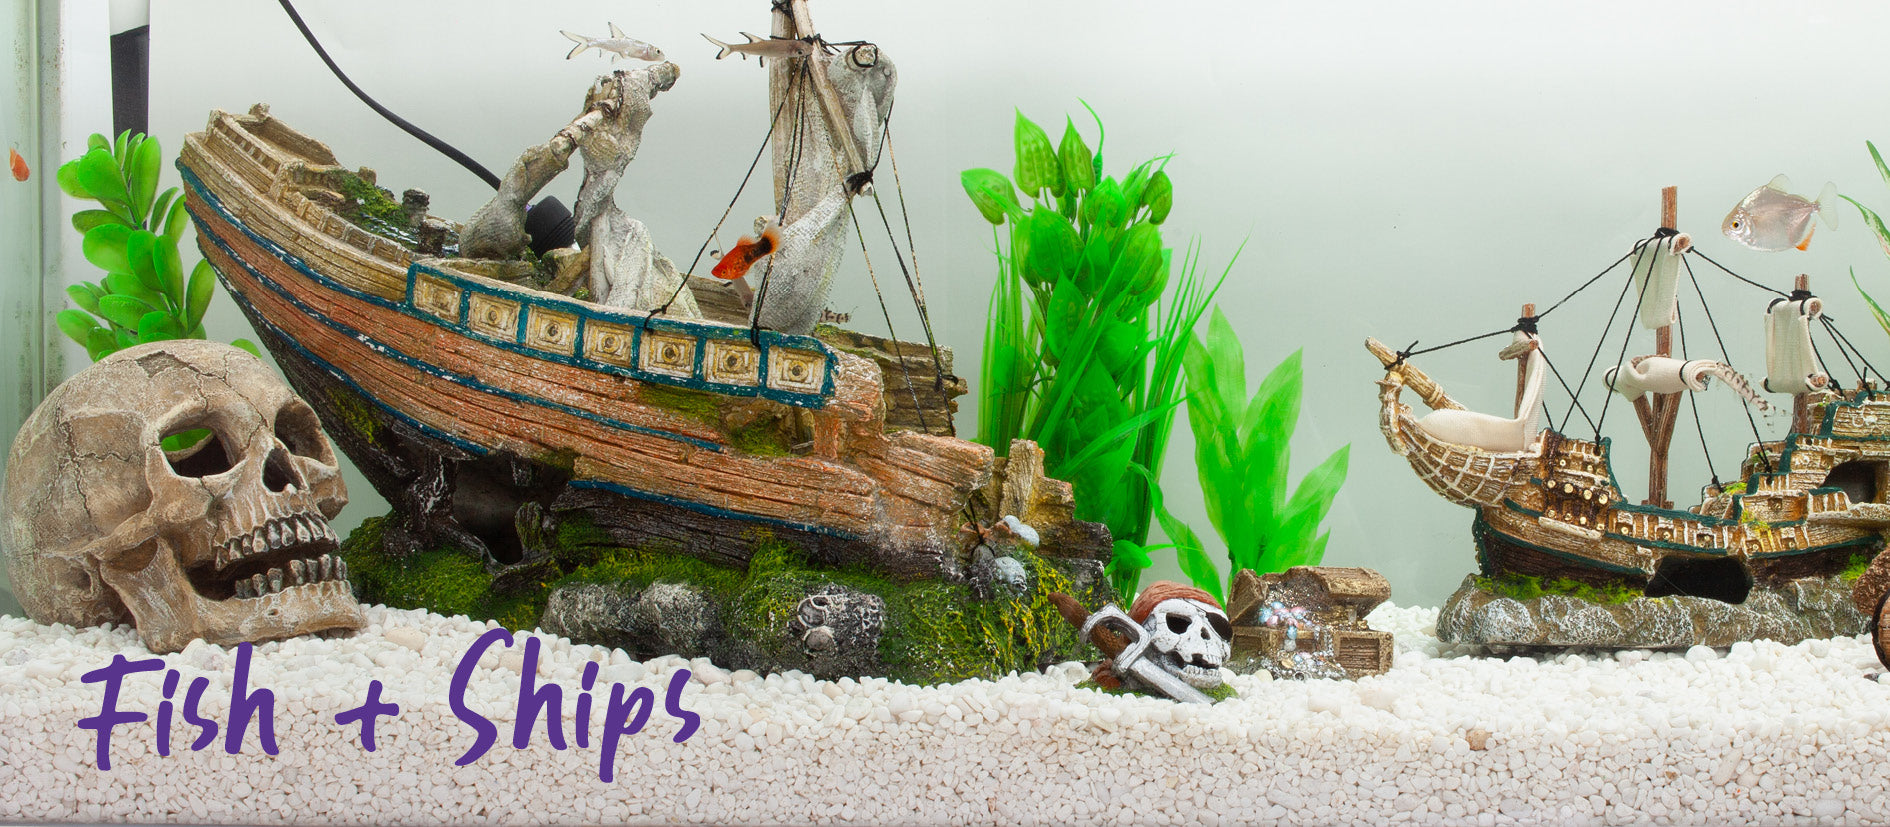 fish tank ornaments showing skull and sunken pirate ship with plastic green plants